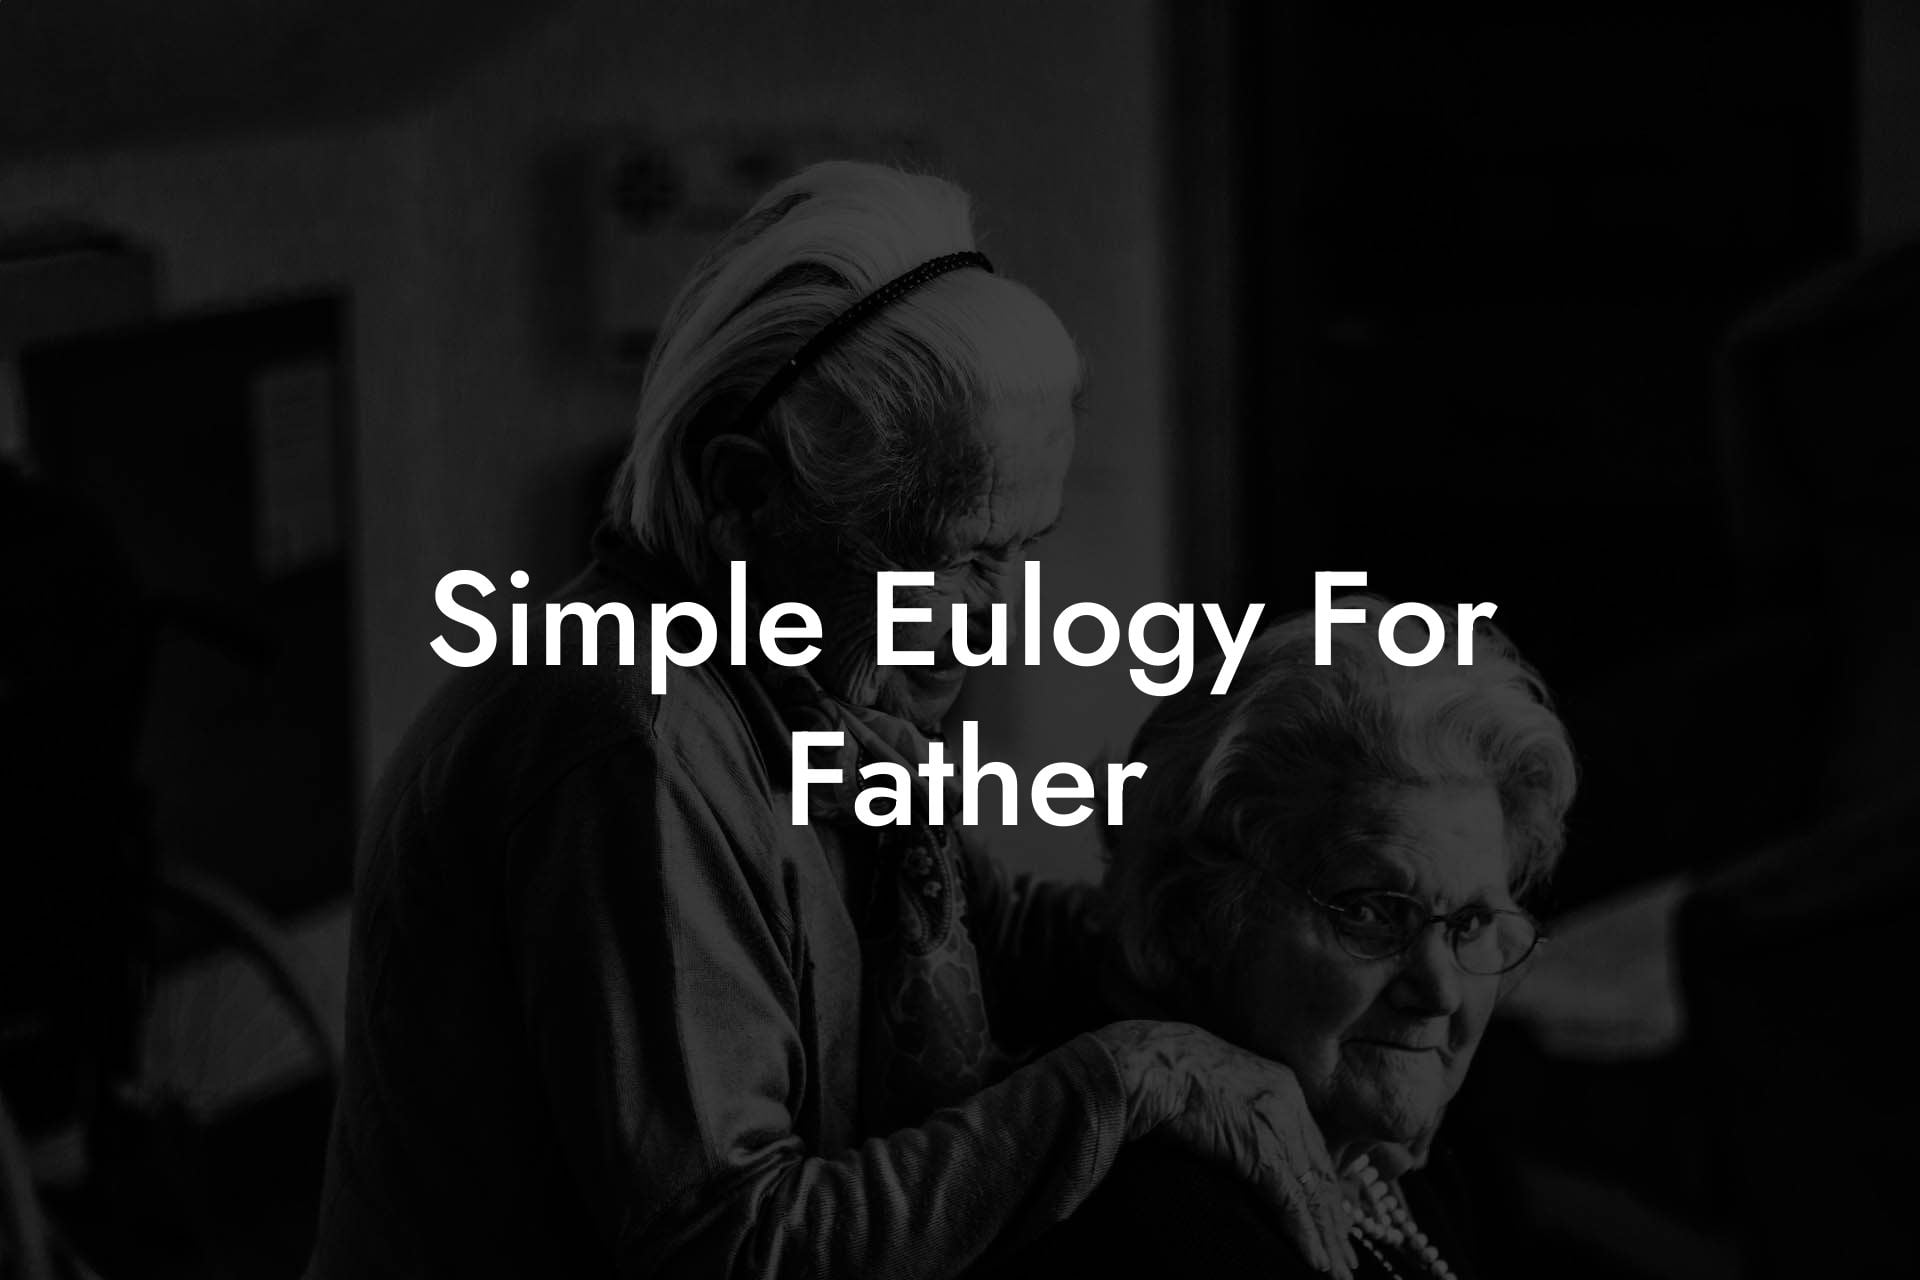 Simple Eulogy For Father